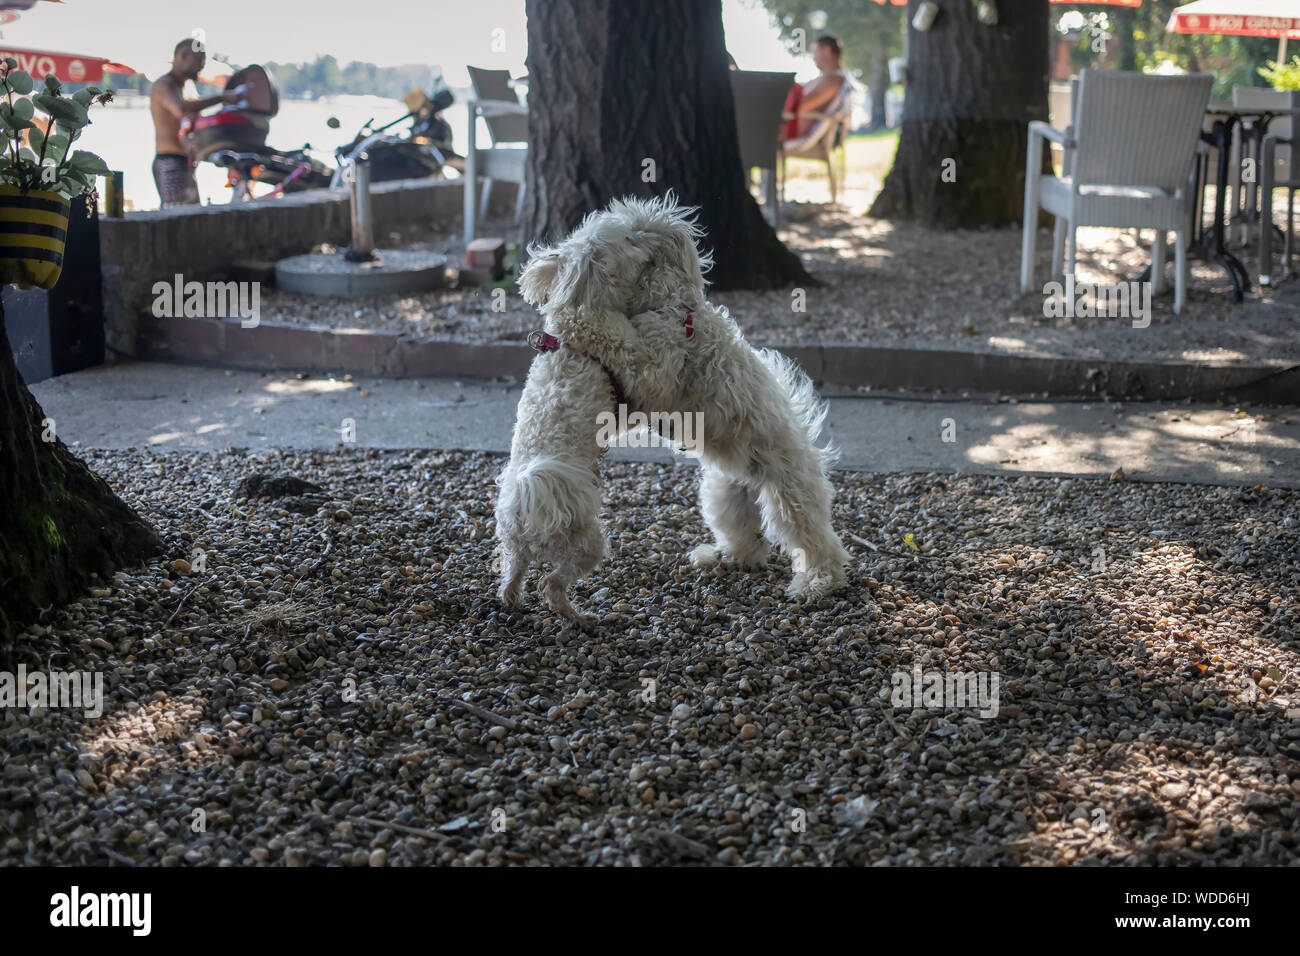 Nanja, Bichon Bolognese doggie (right), and Maltese dog Baky playing at the coffee shop terrace Stock Photo